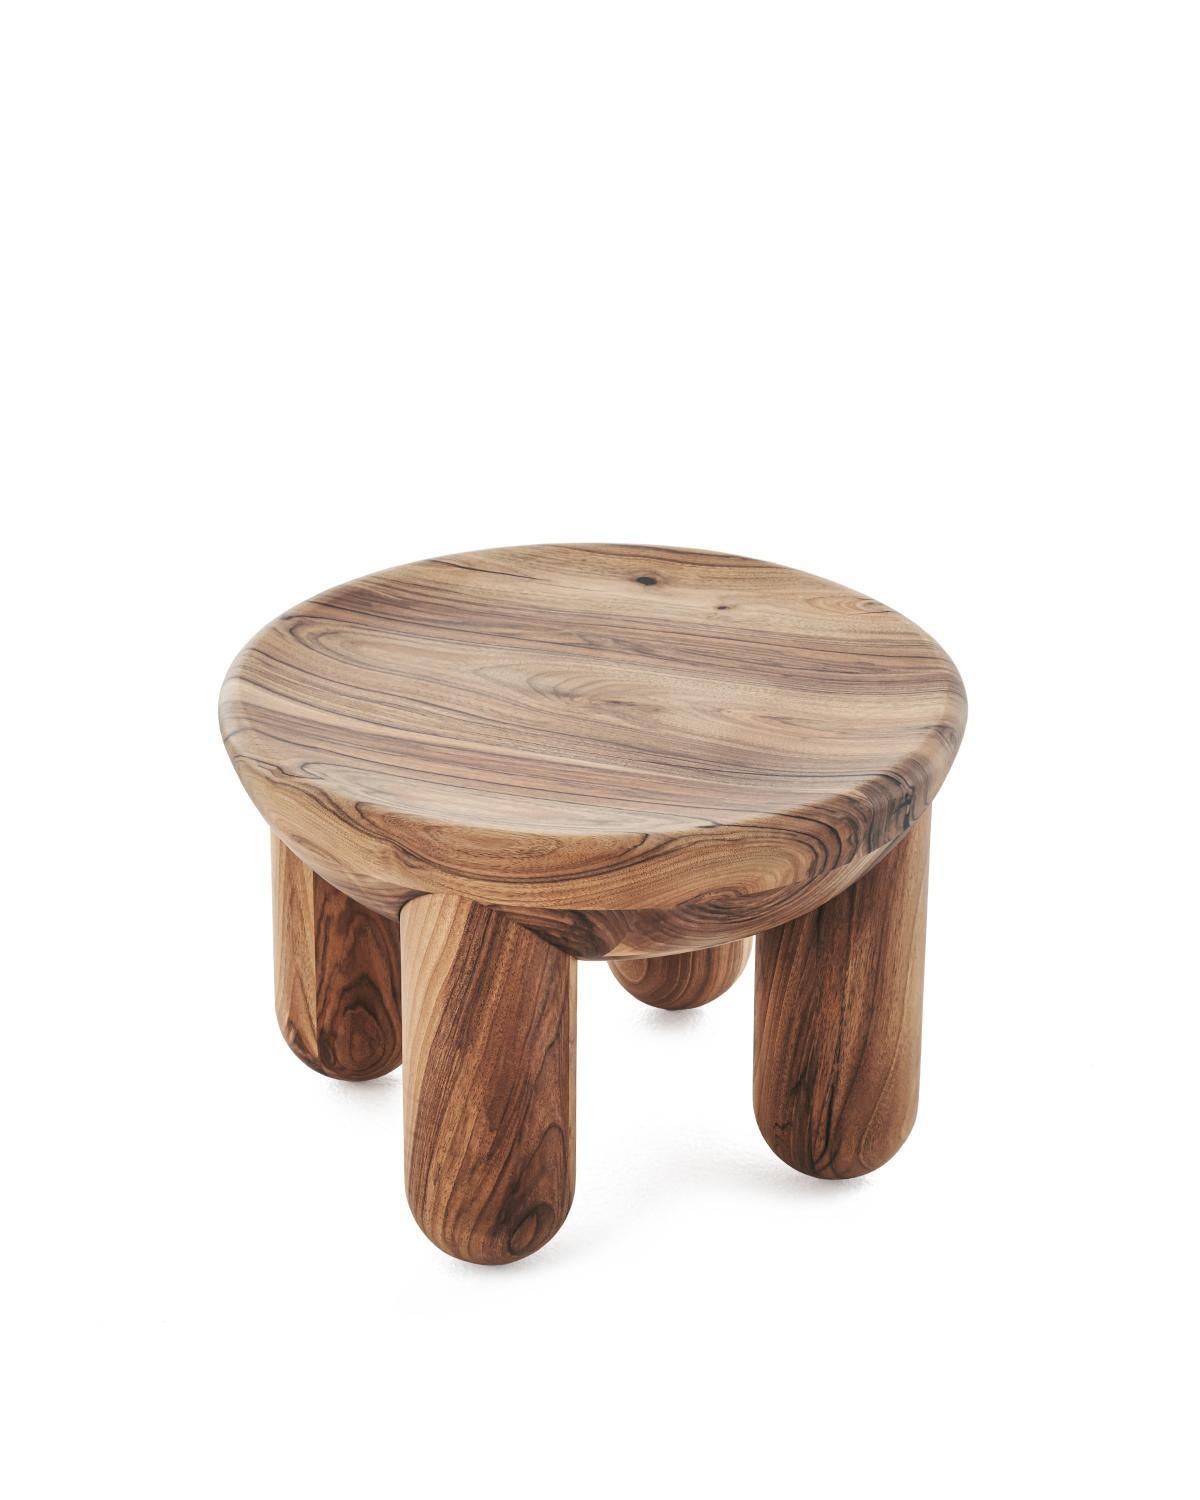 Contemporary Wooden Coffee or Side Table 'Freyja 1' by Noom, Brown Stained Ash For Sale 11